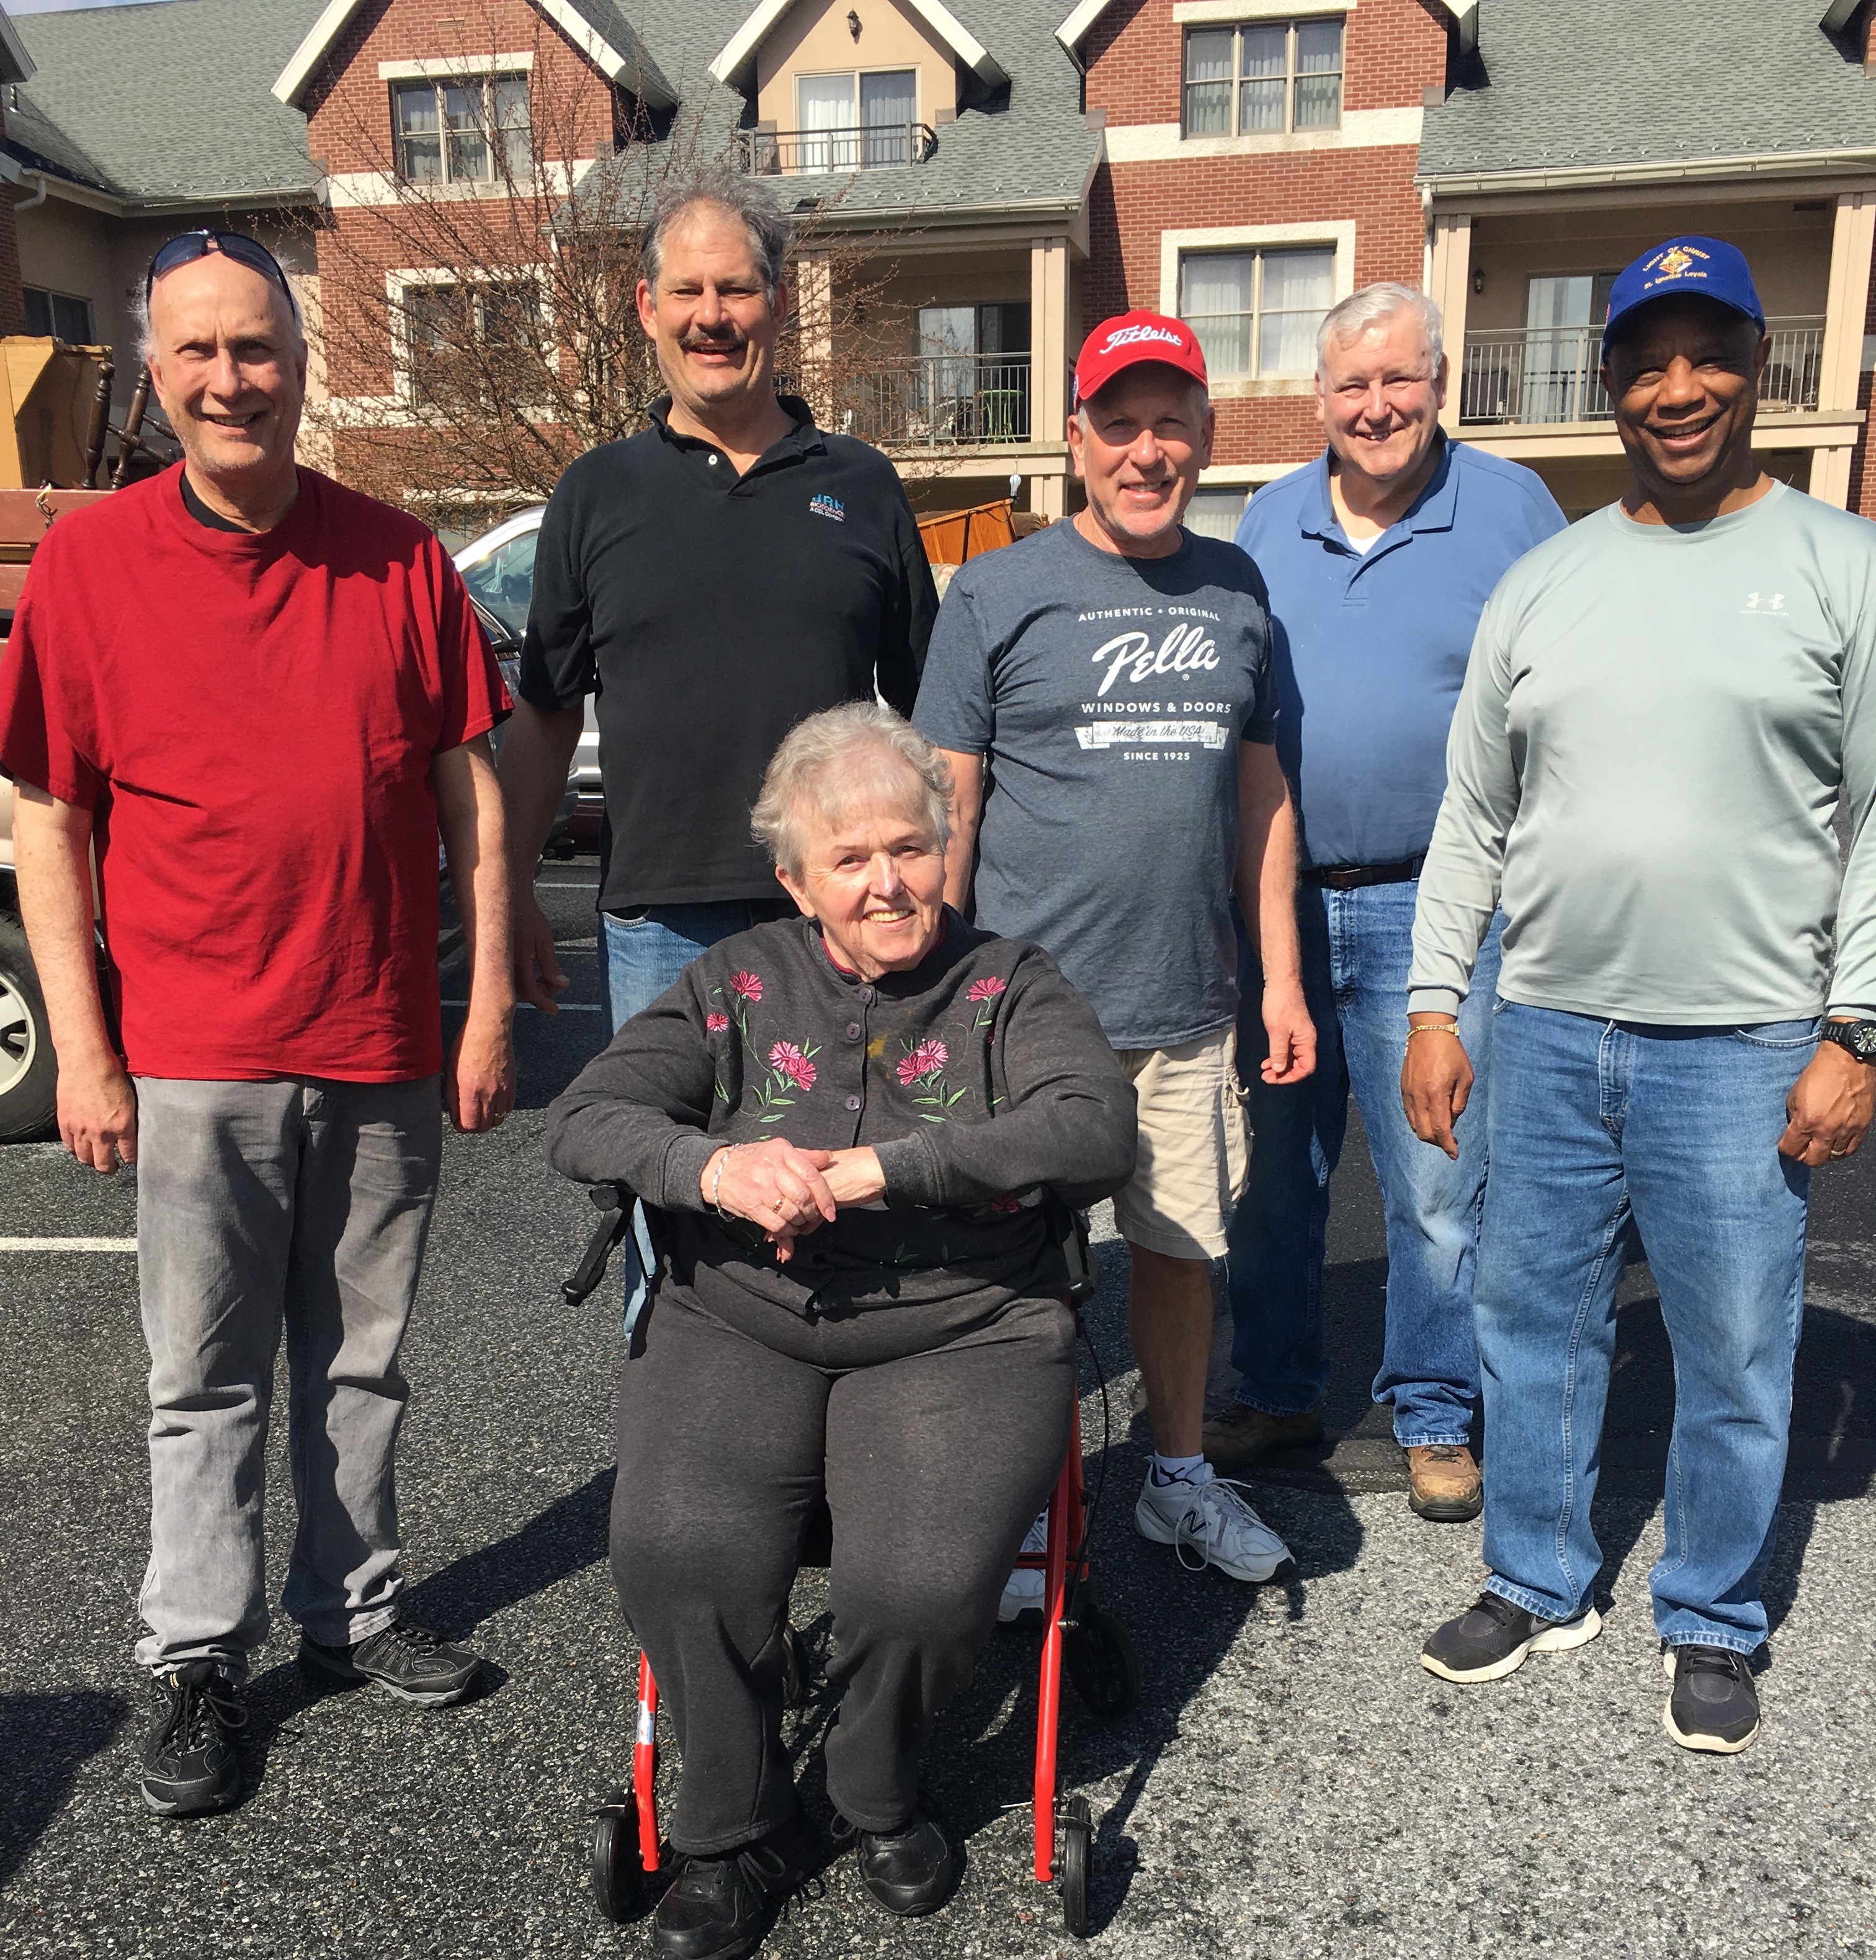 Members of the Knights helped the widow of one of our Knights move into a retirement home over the weekend.